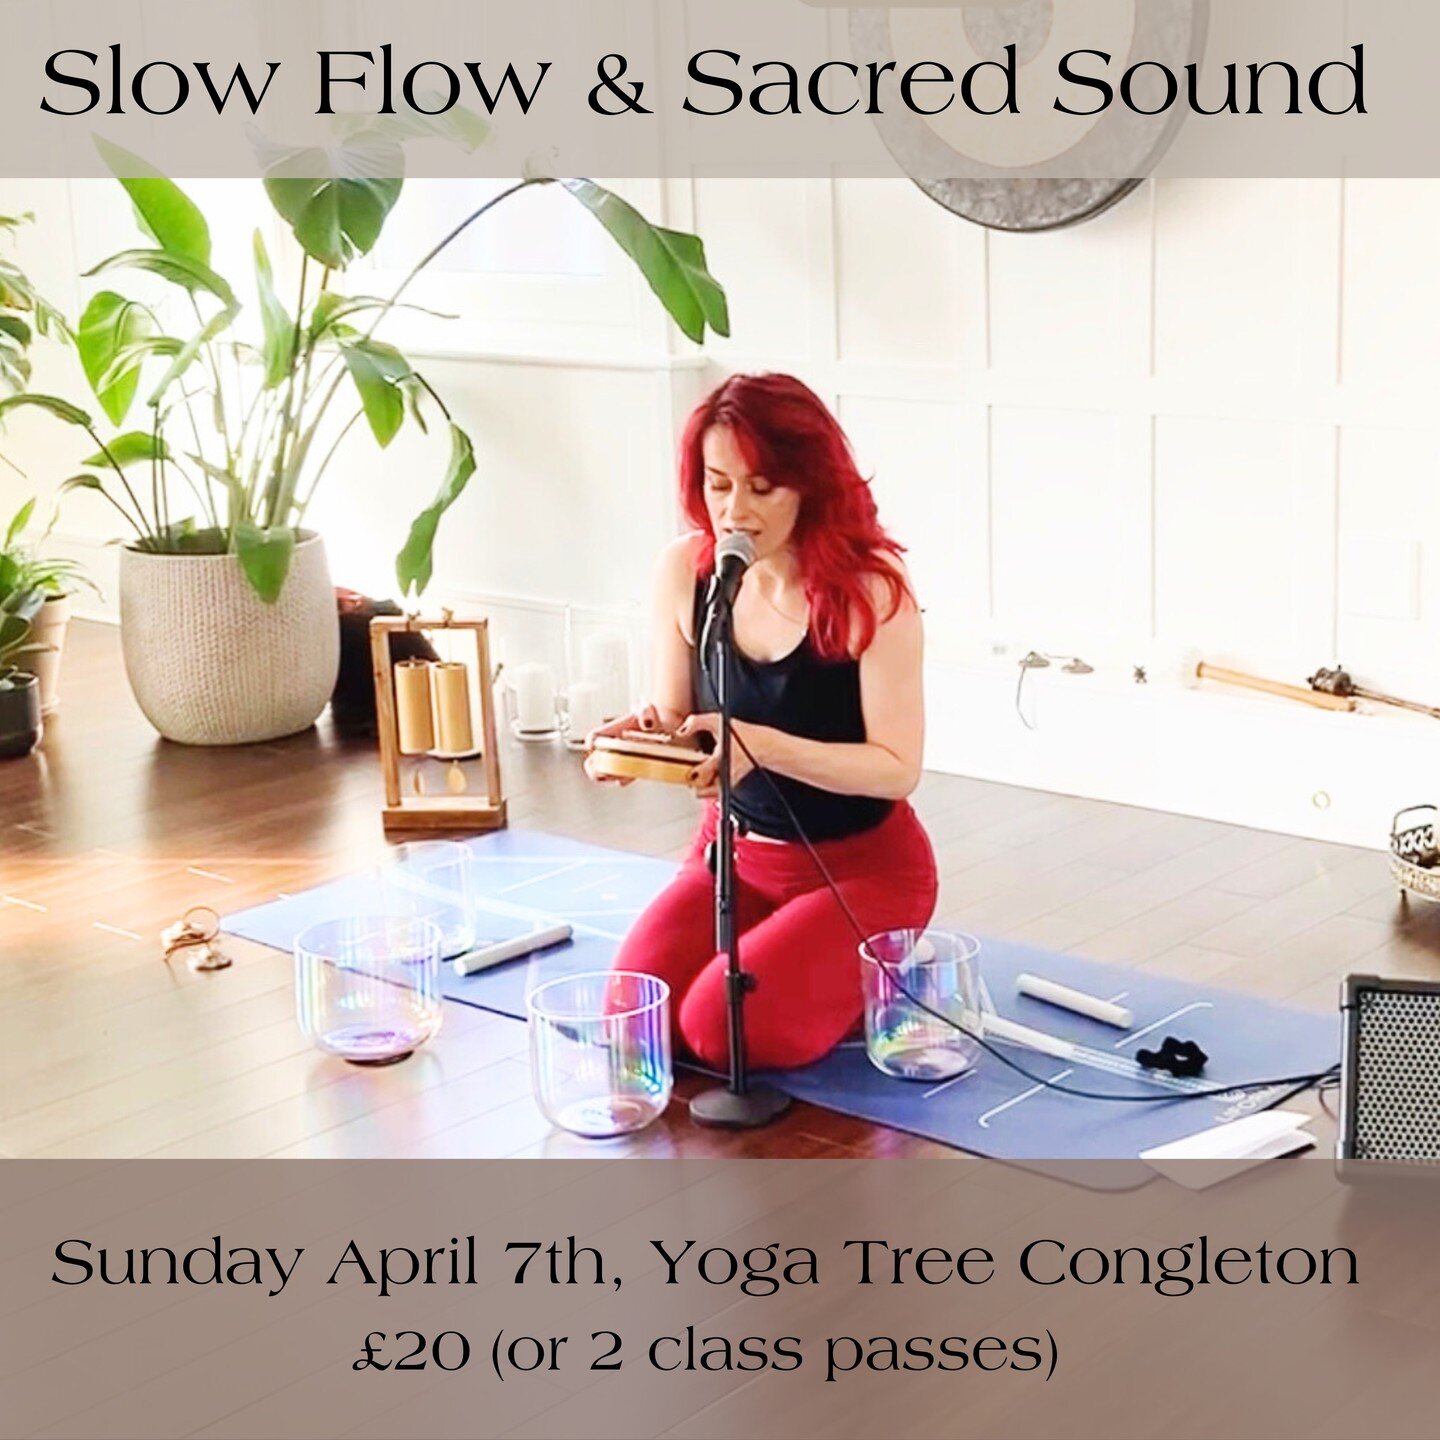 THIS SUNDAY ***Slow Flow &amp; Sacred Sound***
18:00 - 20:00 at The Yoga Tree, Congleton.

A gentle, yet deep practice, inviting you to turn your focus inwards and gently work into areas we typically hold tension and stress. Bringing body and mind to